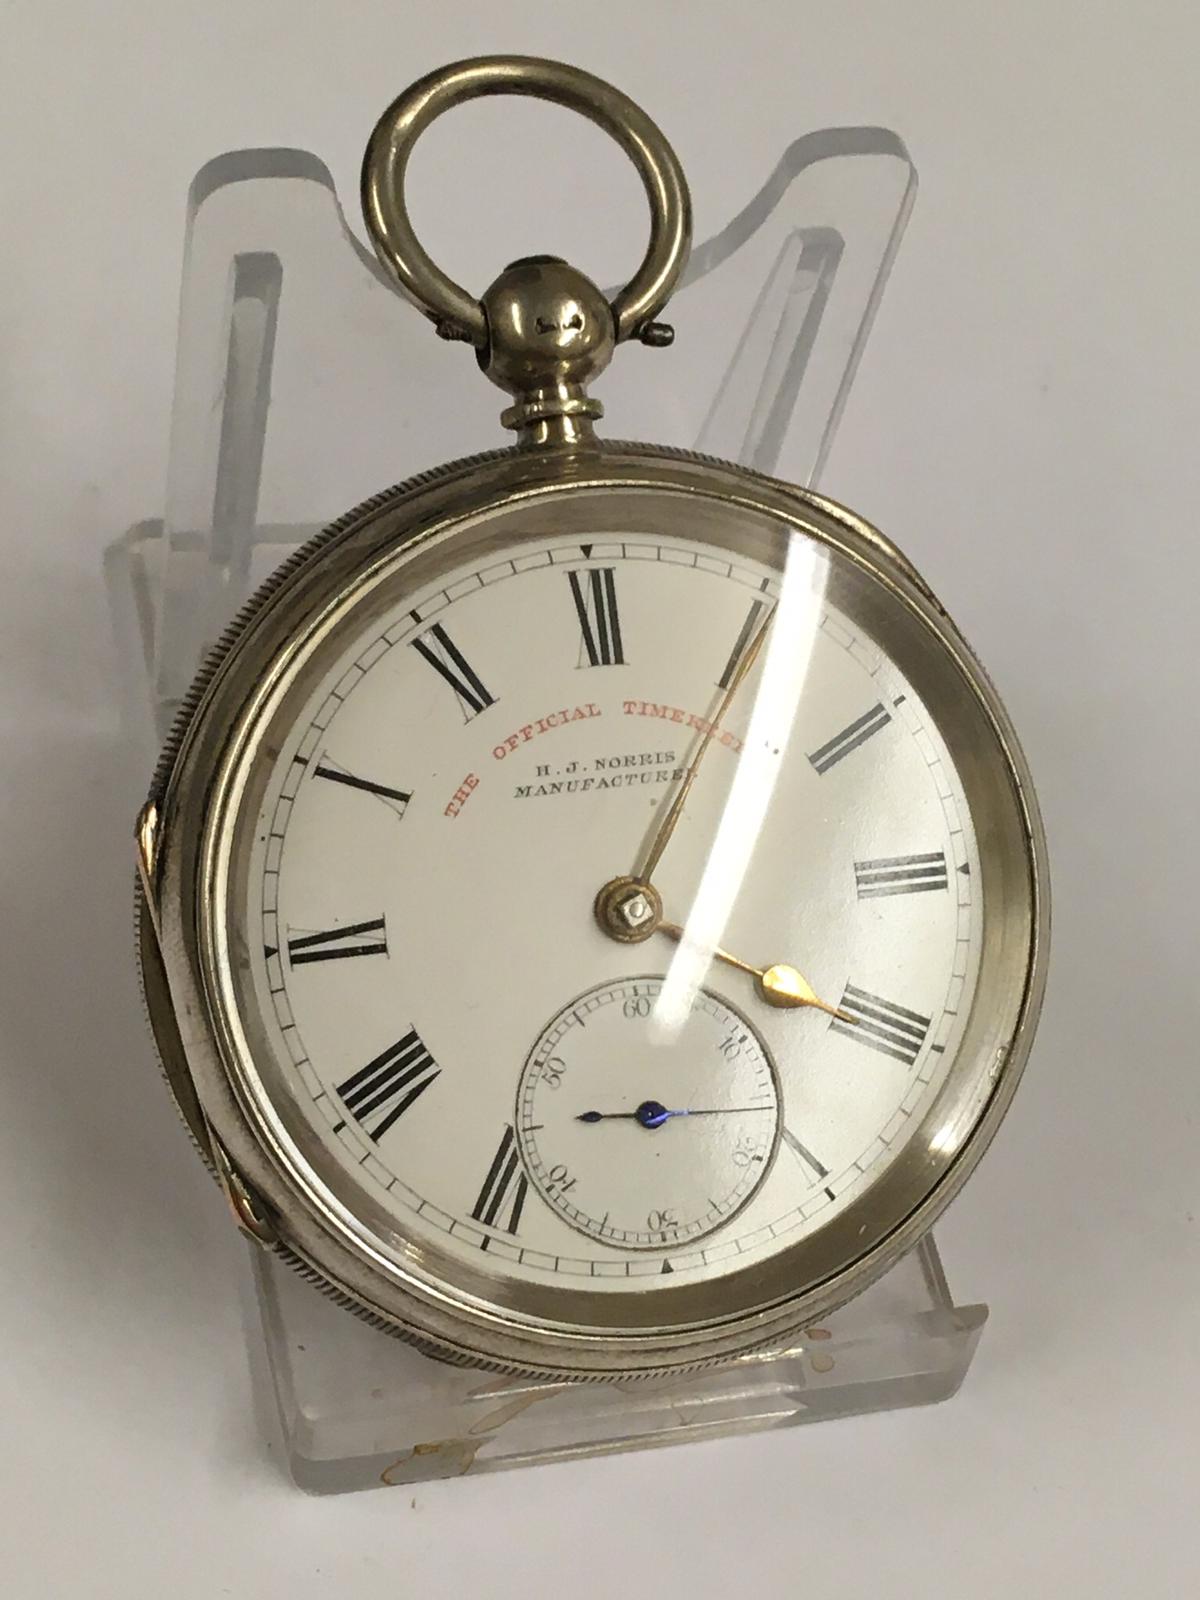 Antique silver lever pocket watch ( Coventry ). Ticks if shaken but no key . Sold with no guarantees